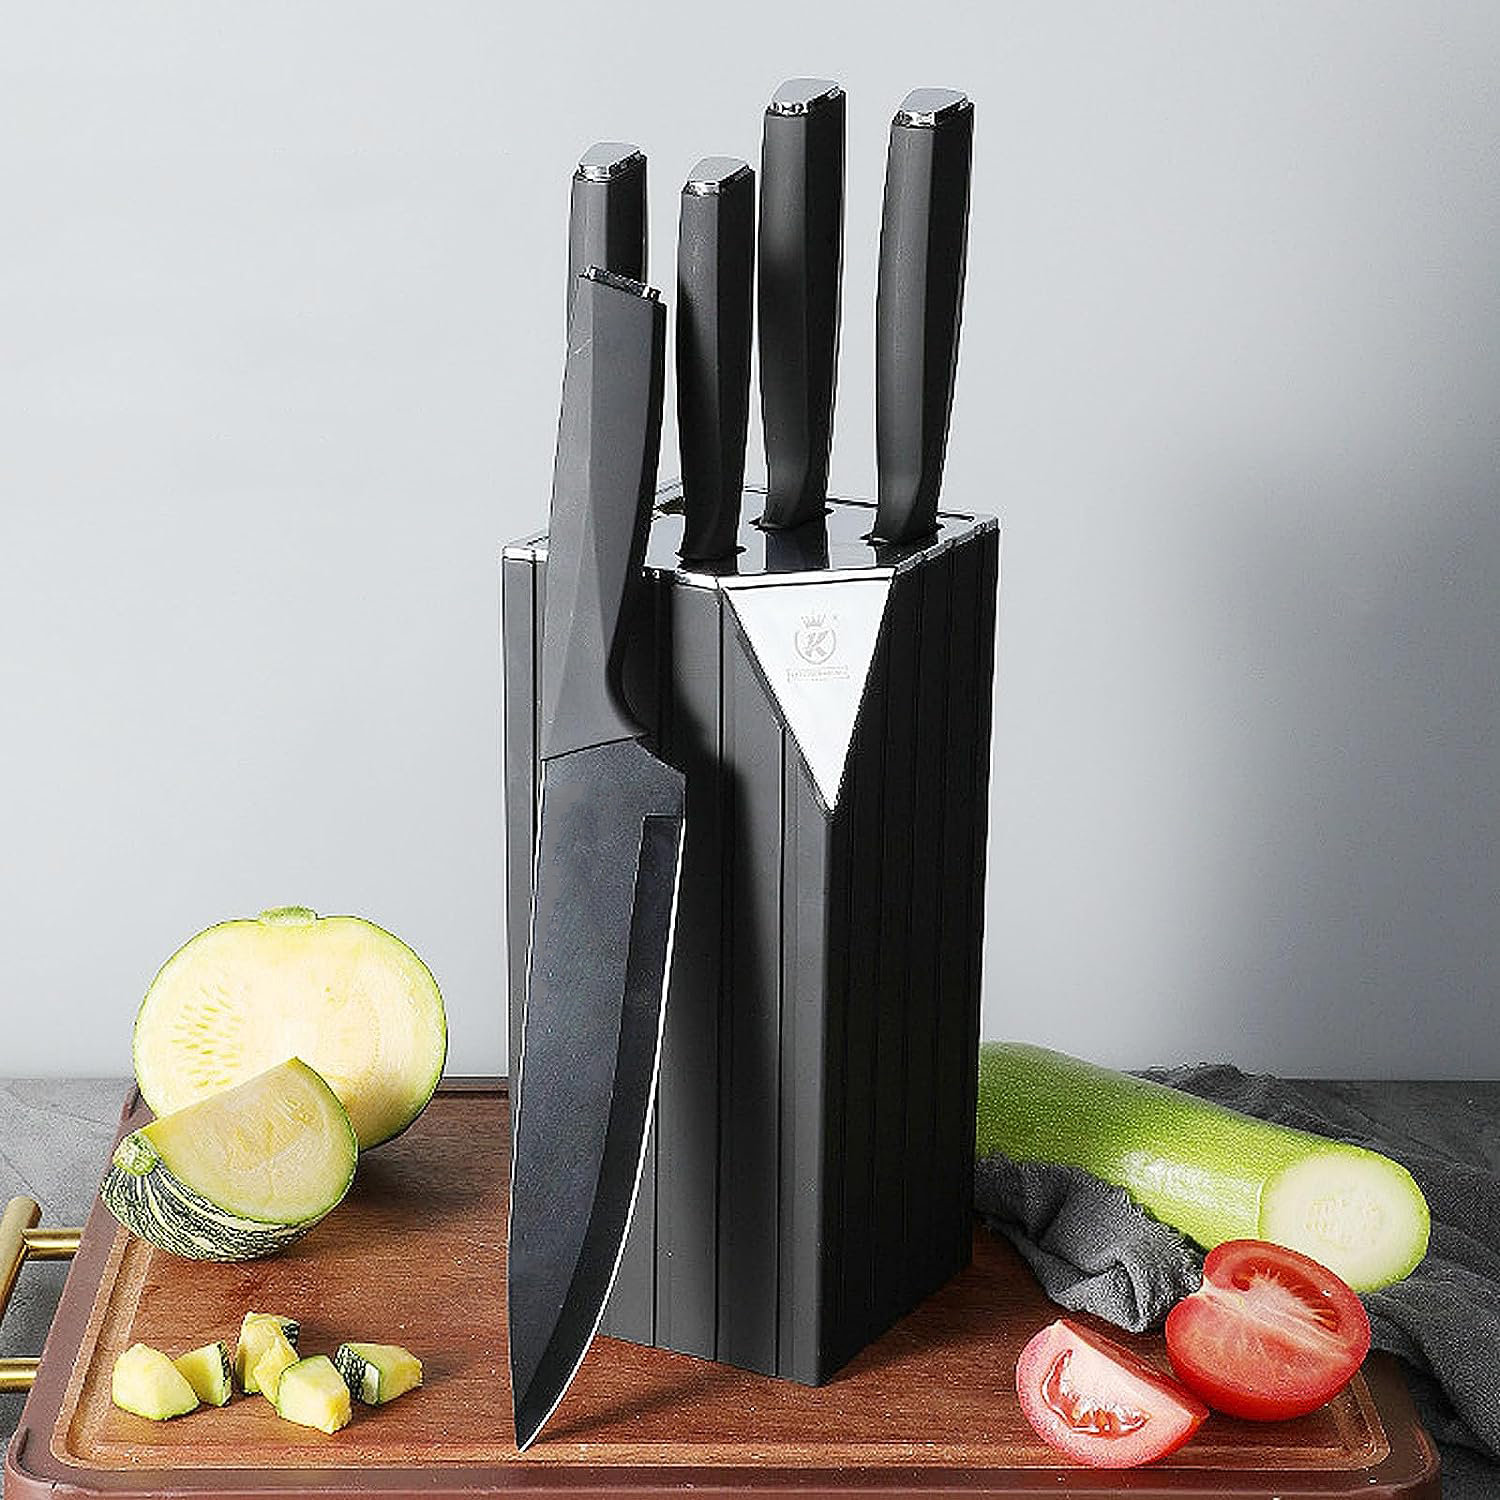 Wuyi 13 Piece High Carbon Stainless Steel Assorted Knife Set wwy-L6153